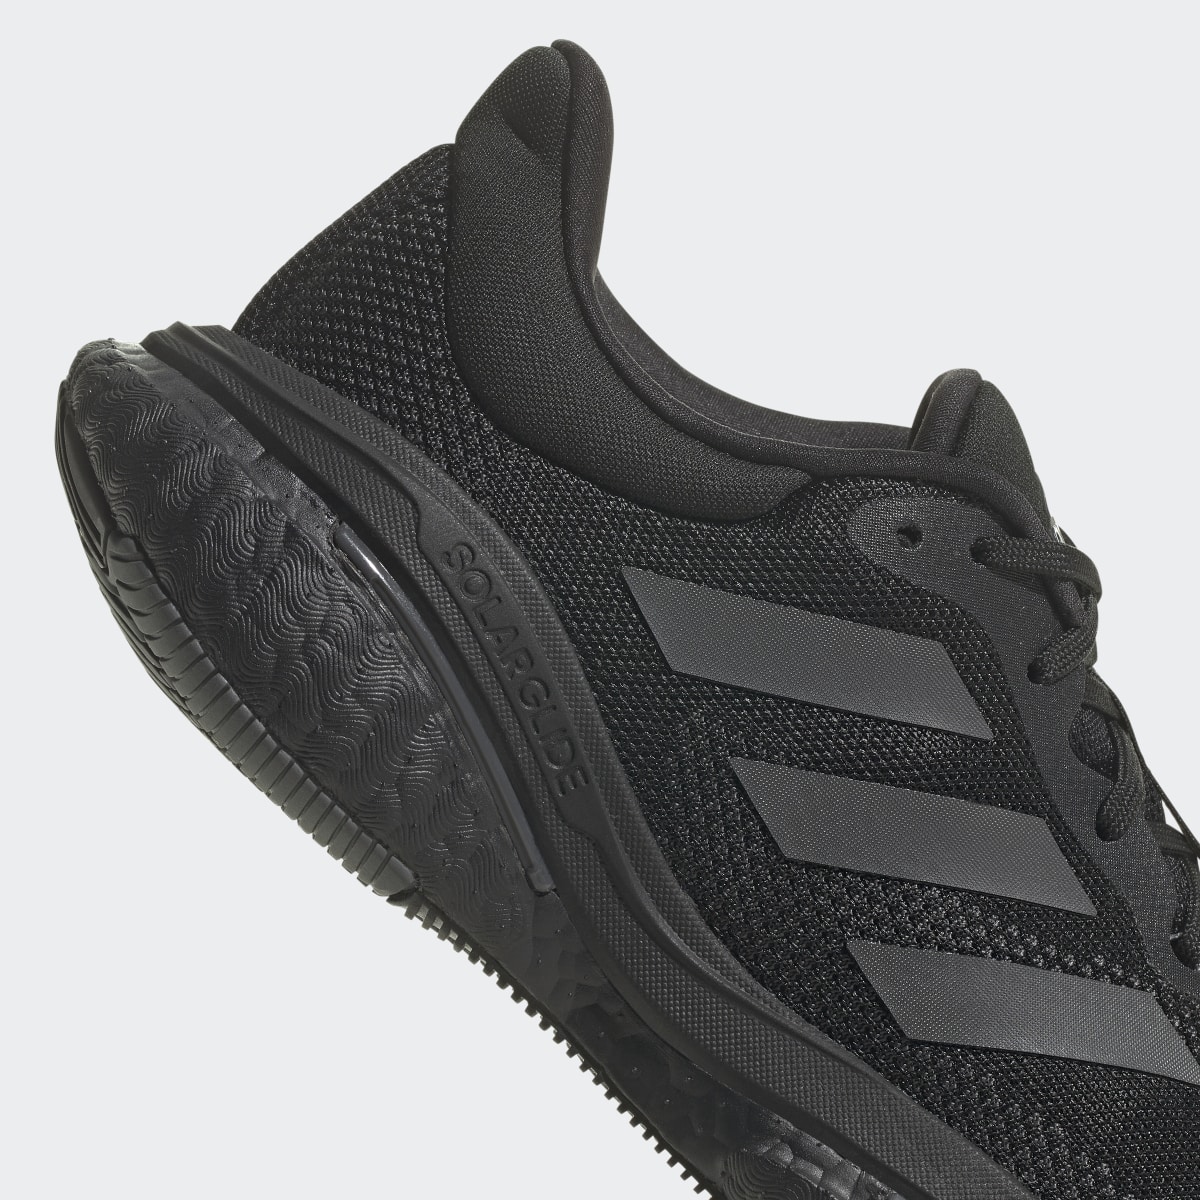 Adidas Solarglide 5 Shoes. 9